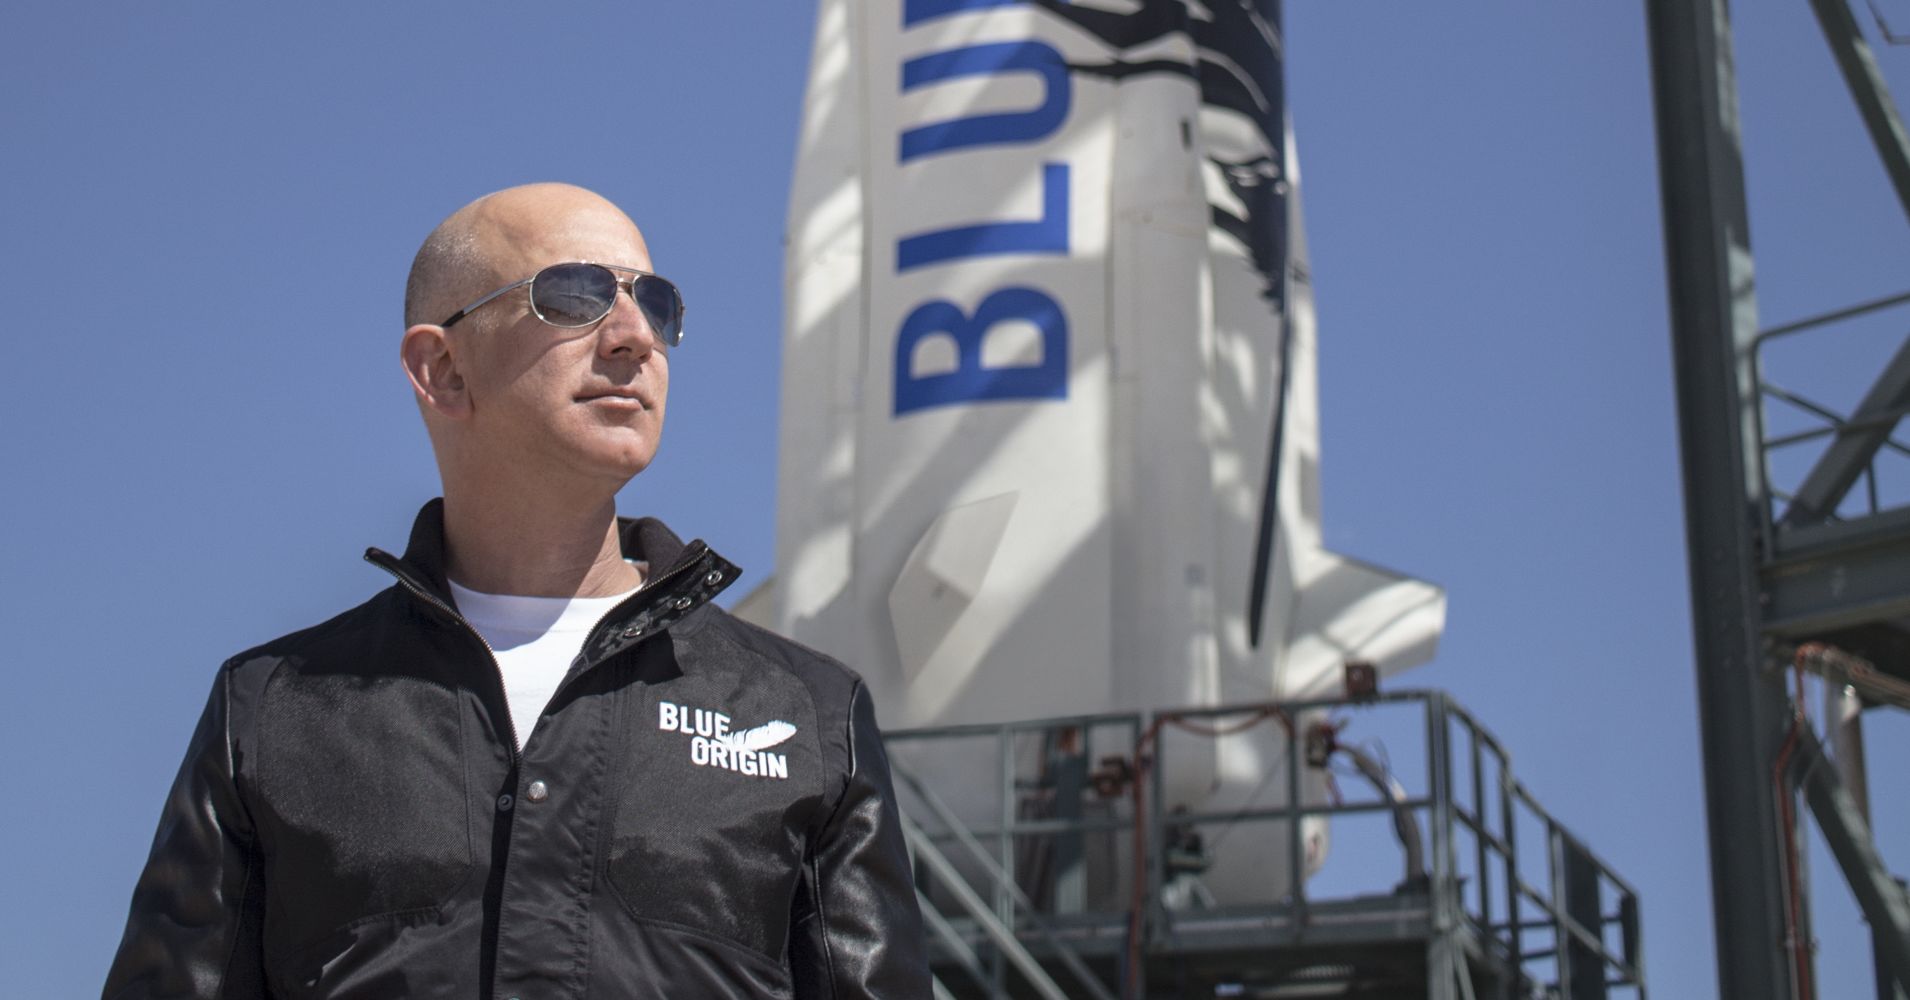 AMAZON WILL LAUNCH 3236 SATELLITES FOR DISTRIBUTION OF THE INTERNET